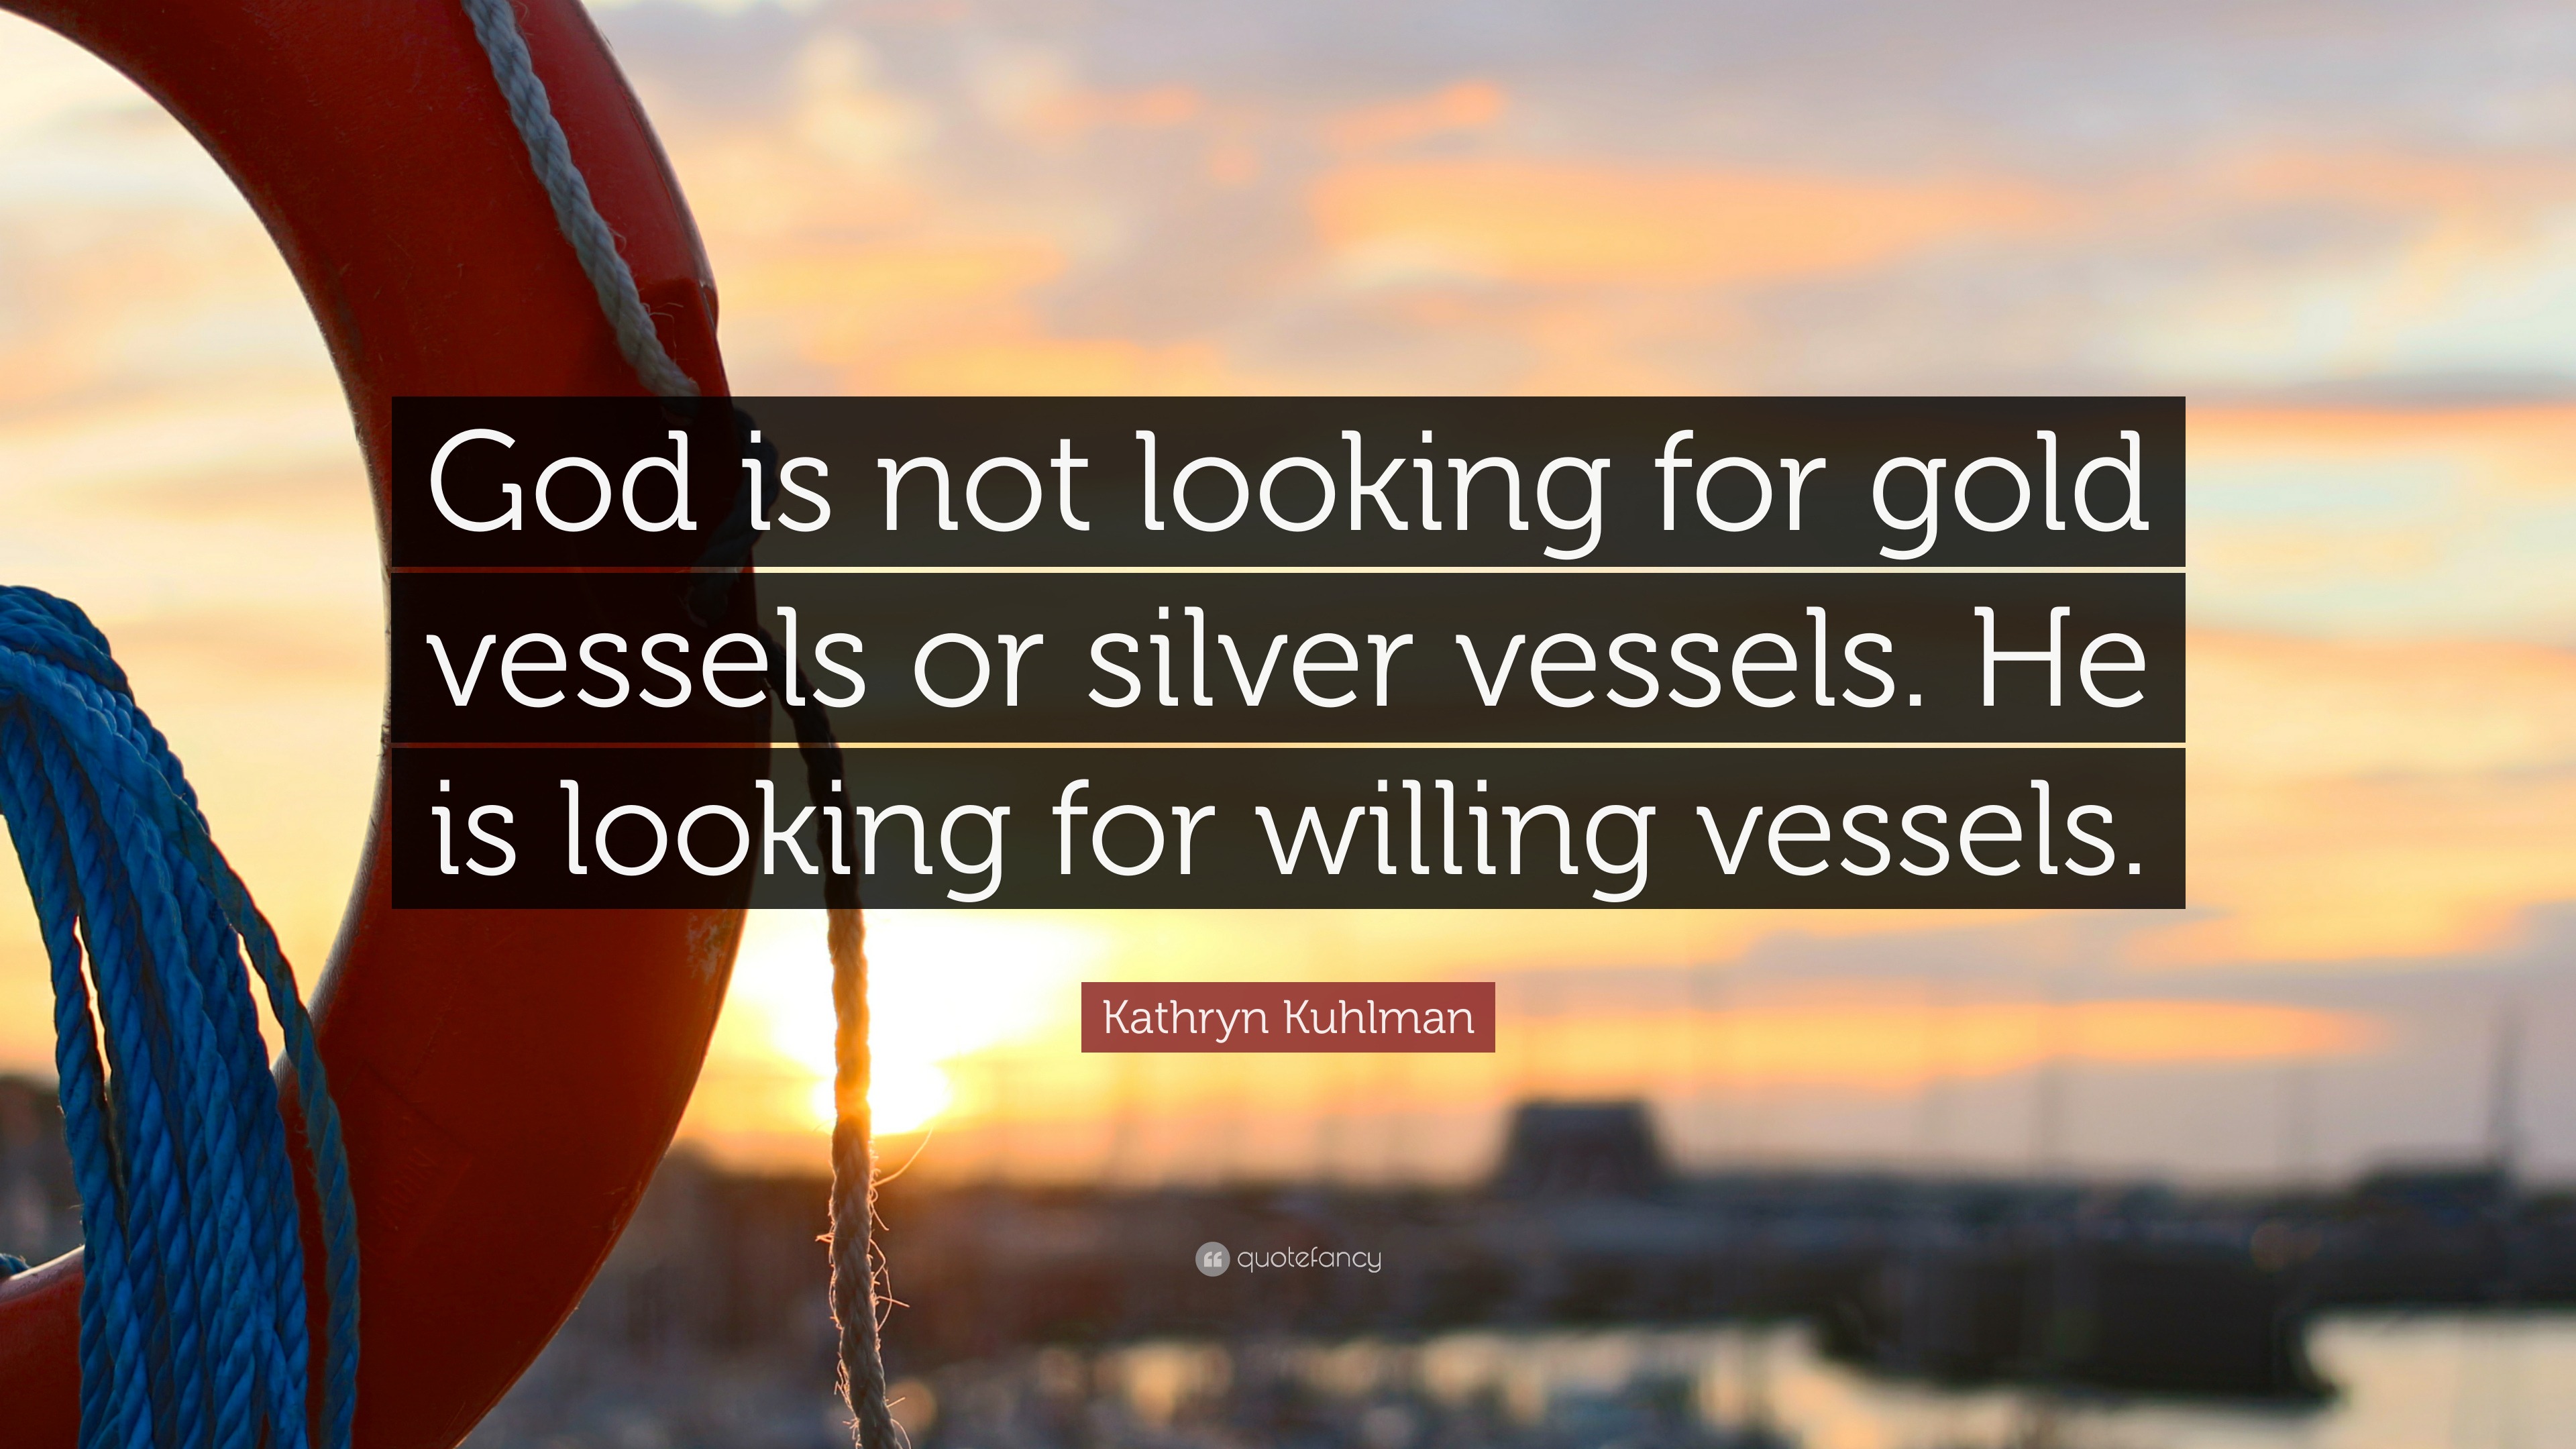 Kathryn Kuhlman Quote: “God is not looking for gold vessels or ...